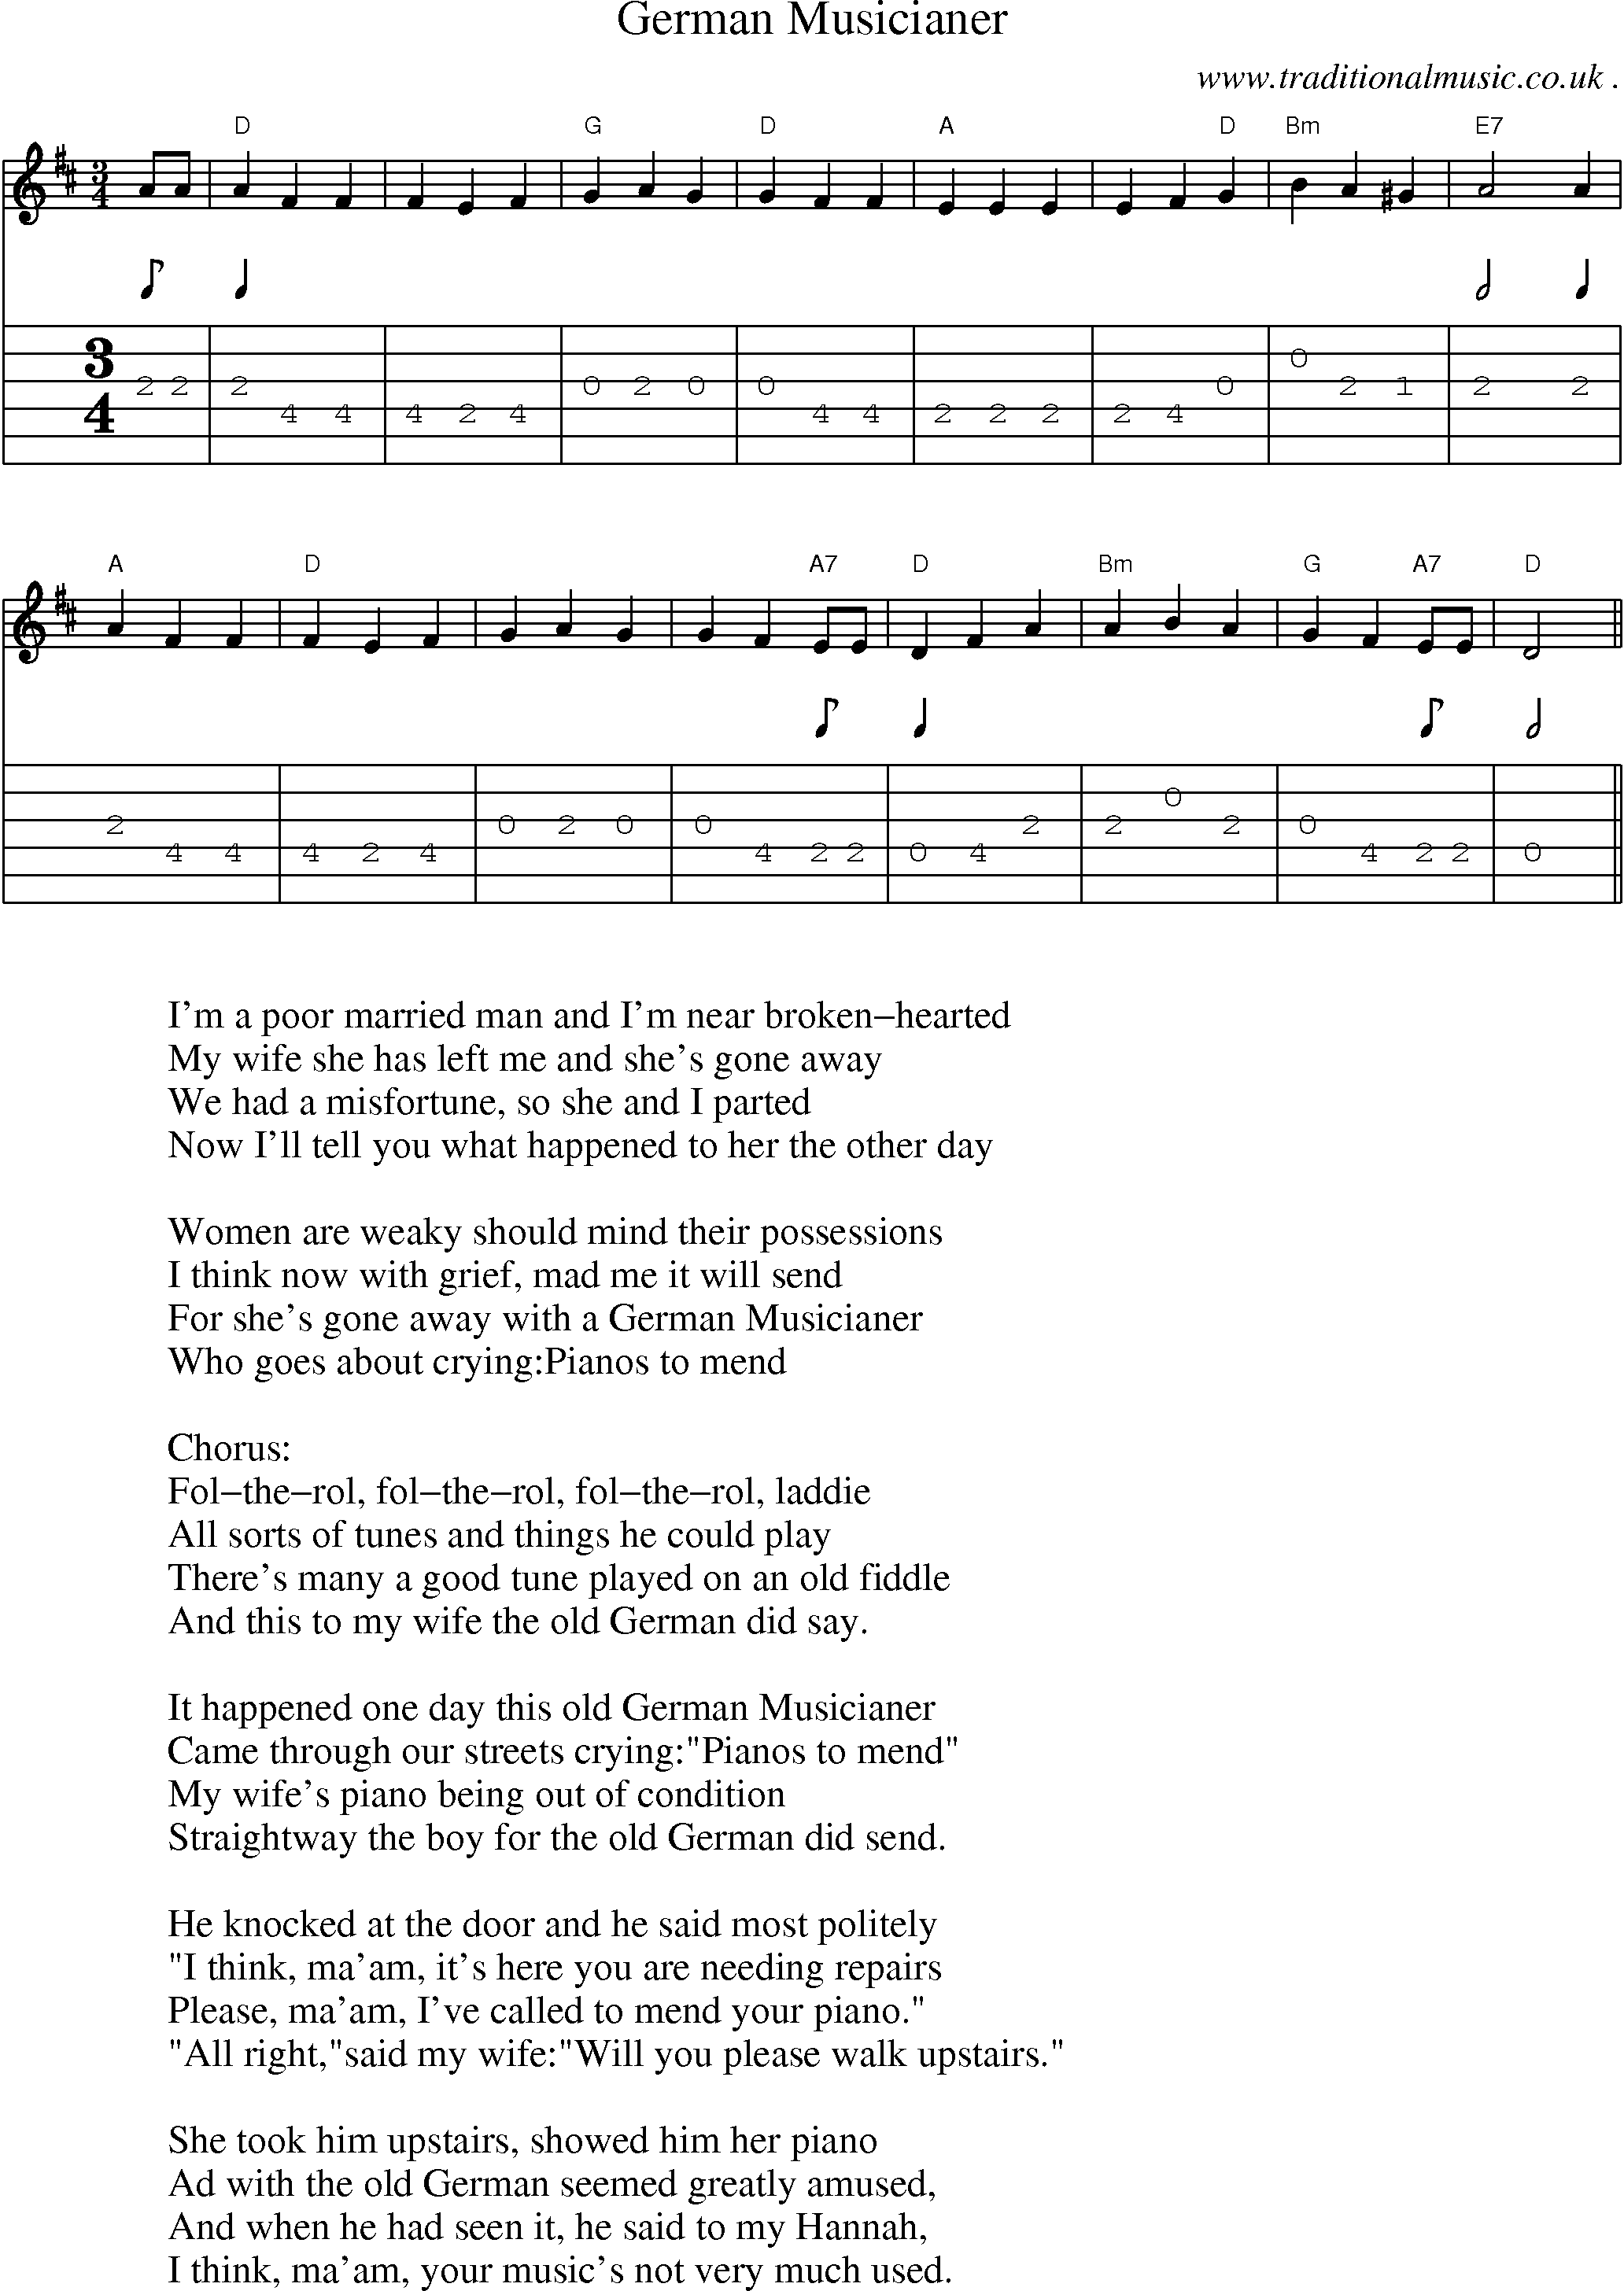 Sheet-Music and Guitar Tabs for German Musicianer